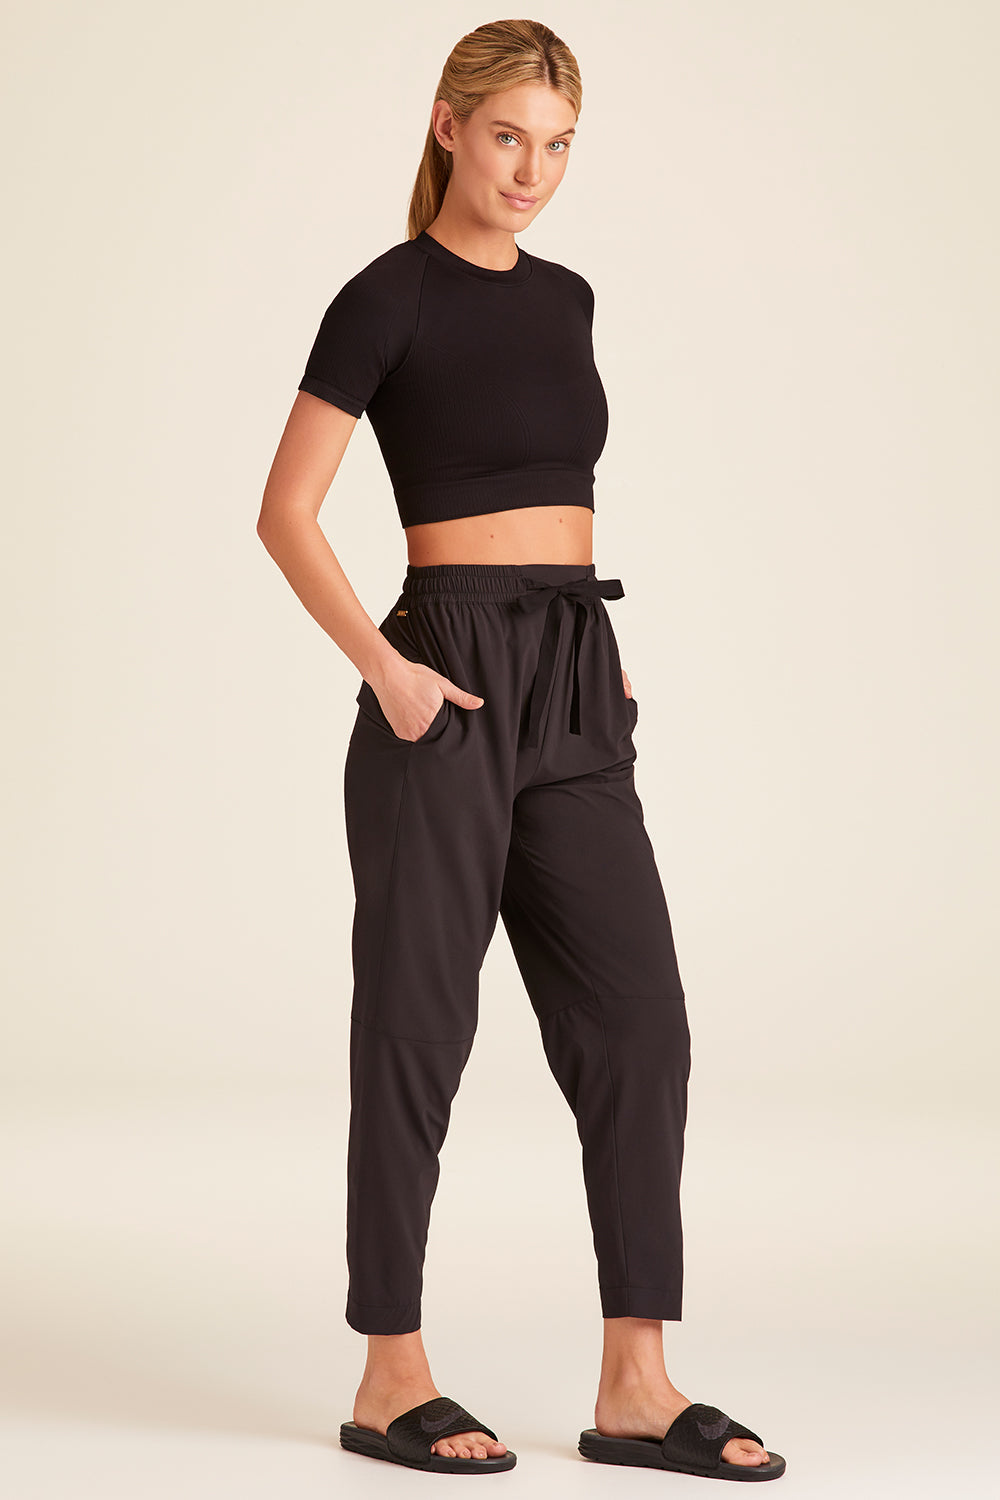 Women's Black High Waisted Trousers